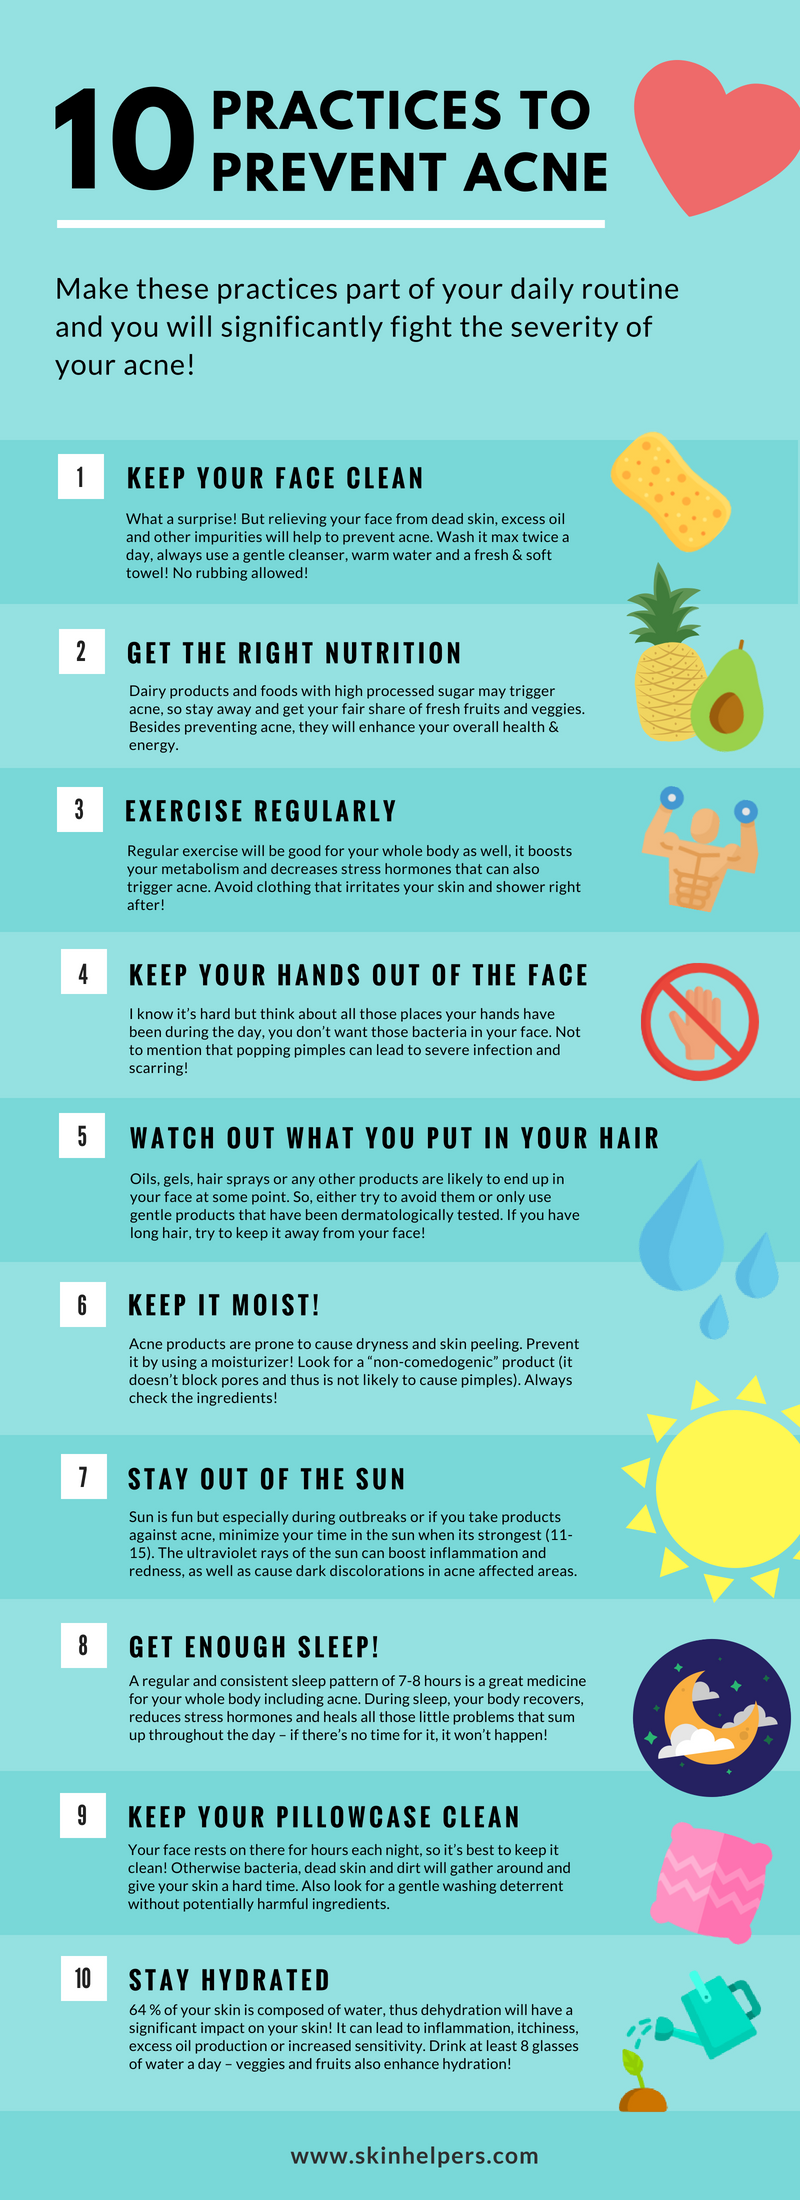 Say Goodbye to Acne: 10 Daily Practices - Infographic